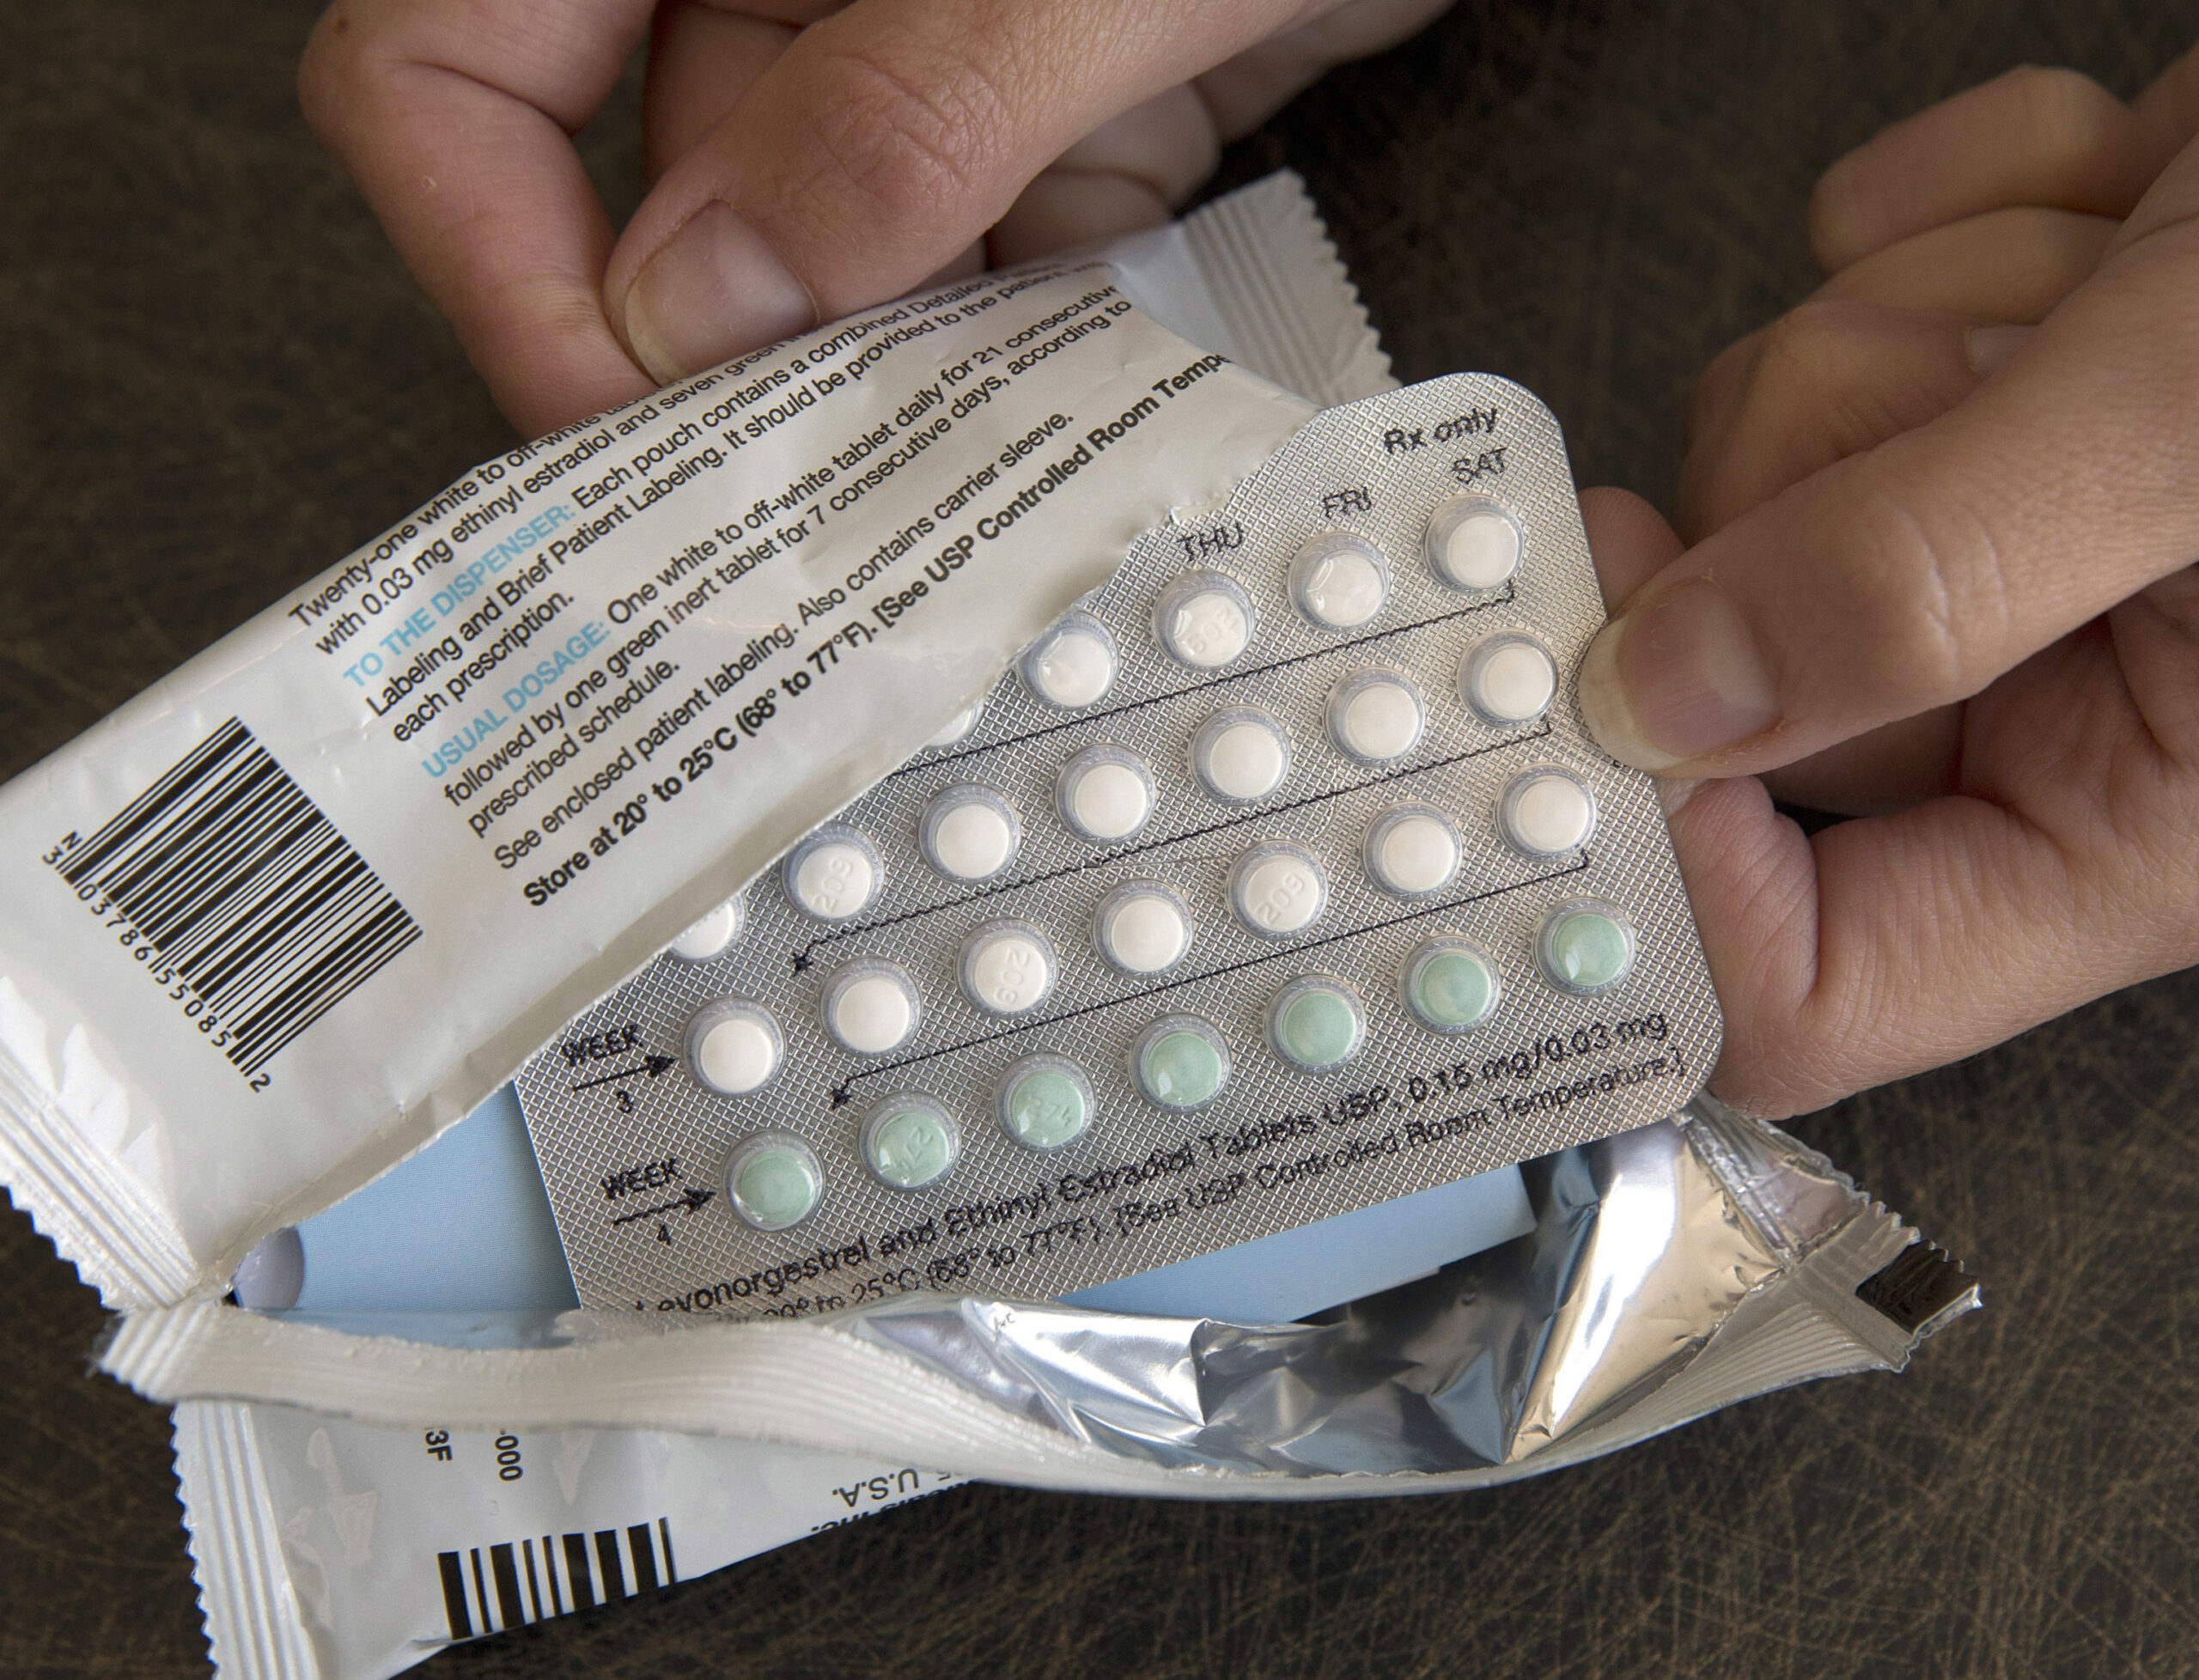 a one-month dosage of hormonal birth control pills